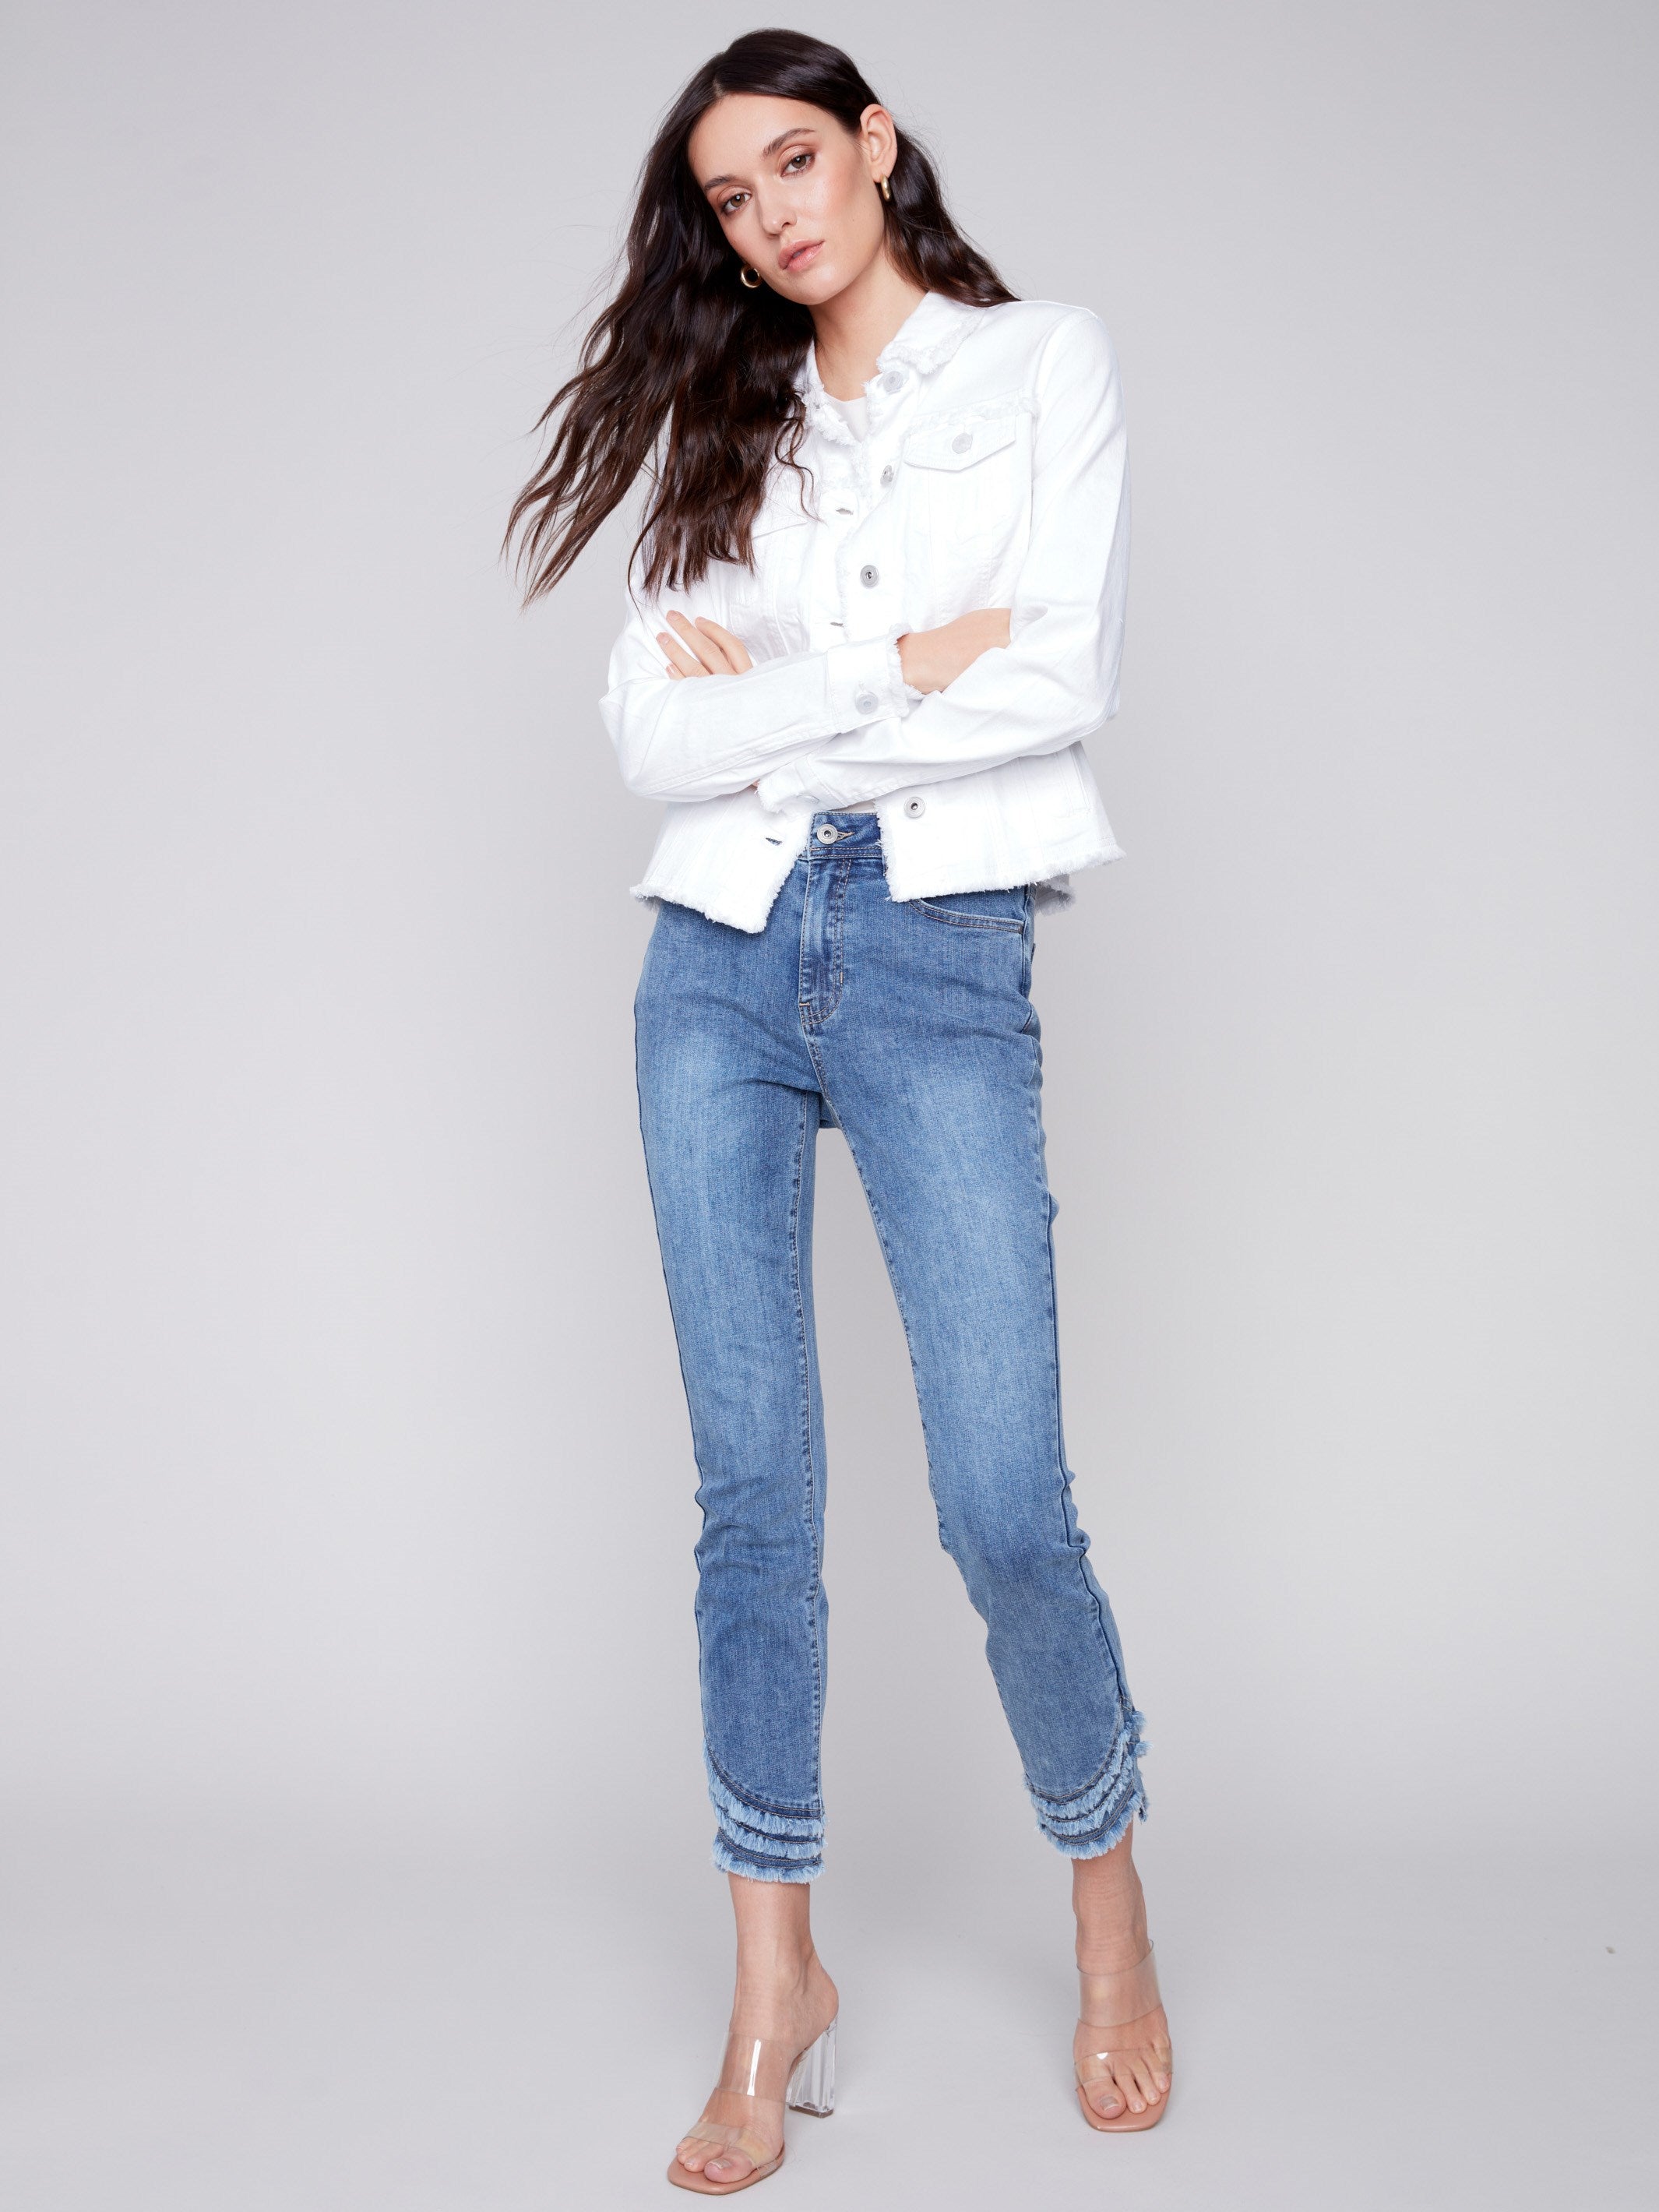 Twill Jean Jacket with Frayed Edges - White - Charlie B Collection Canada - Image 2